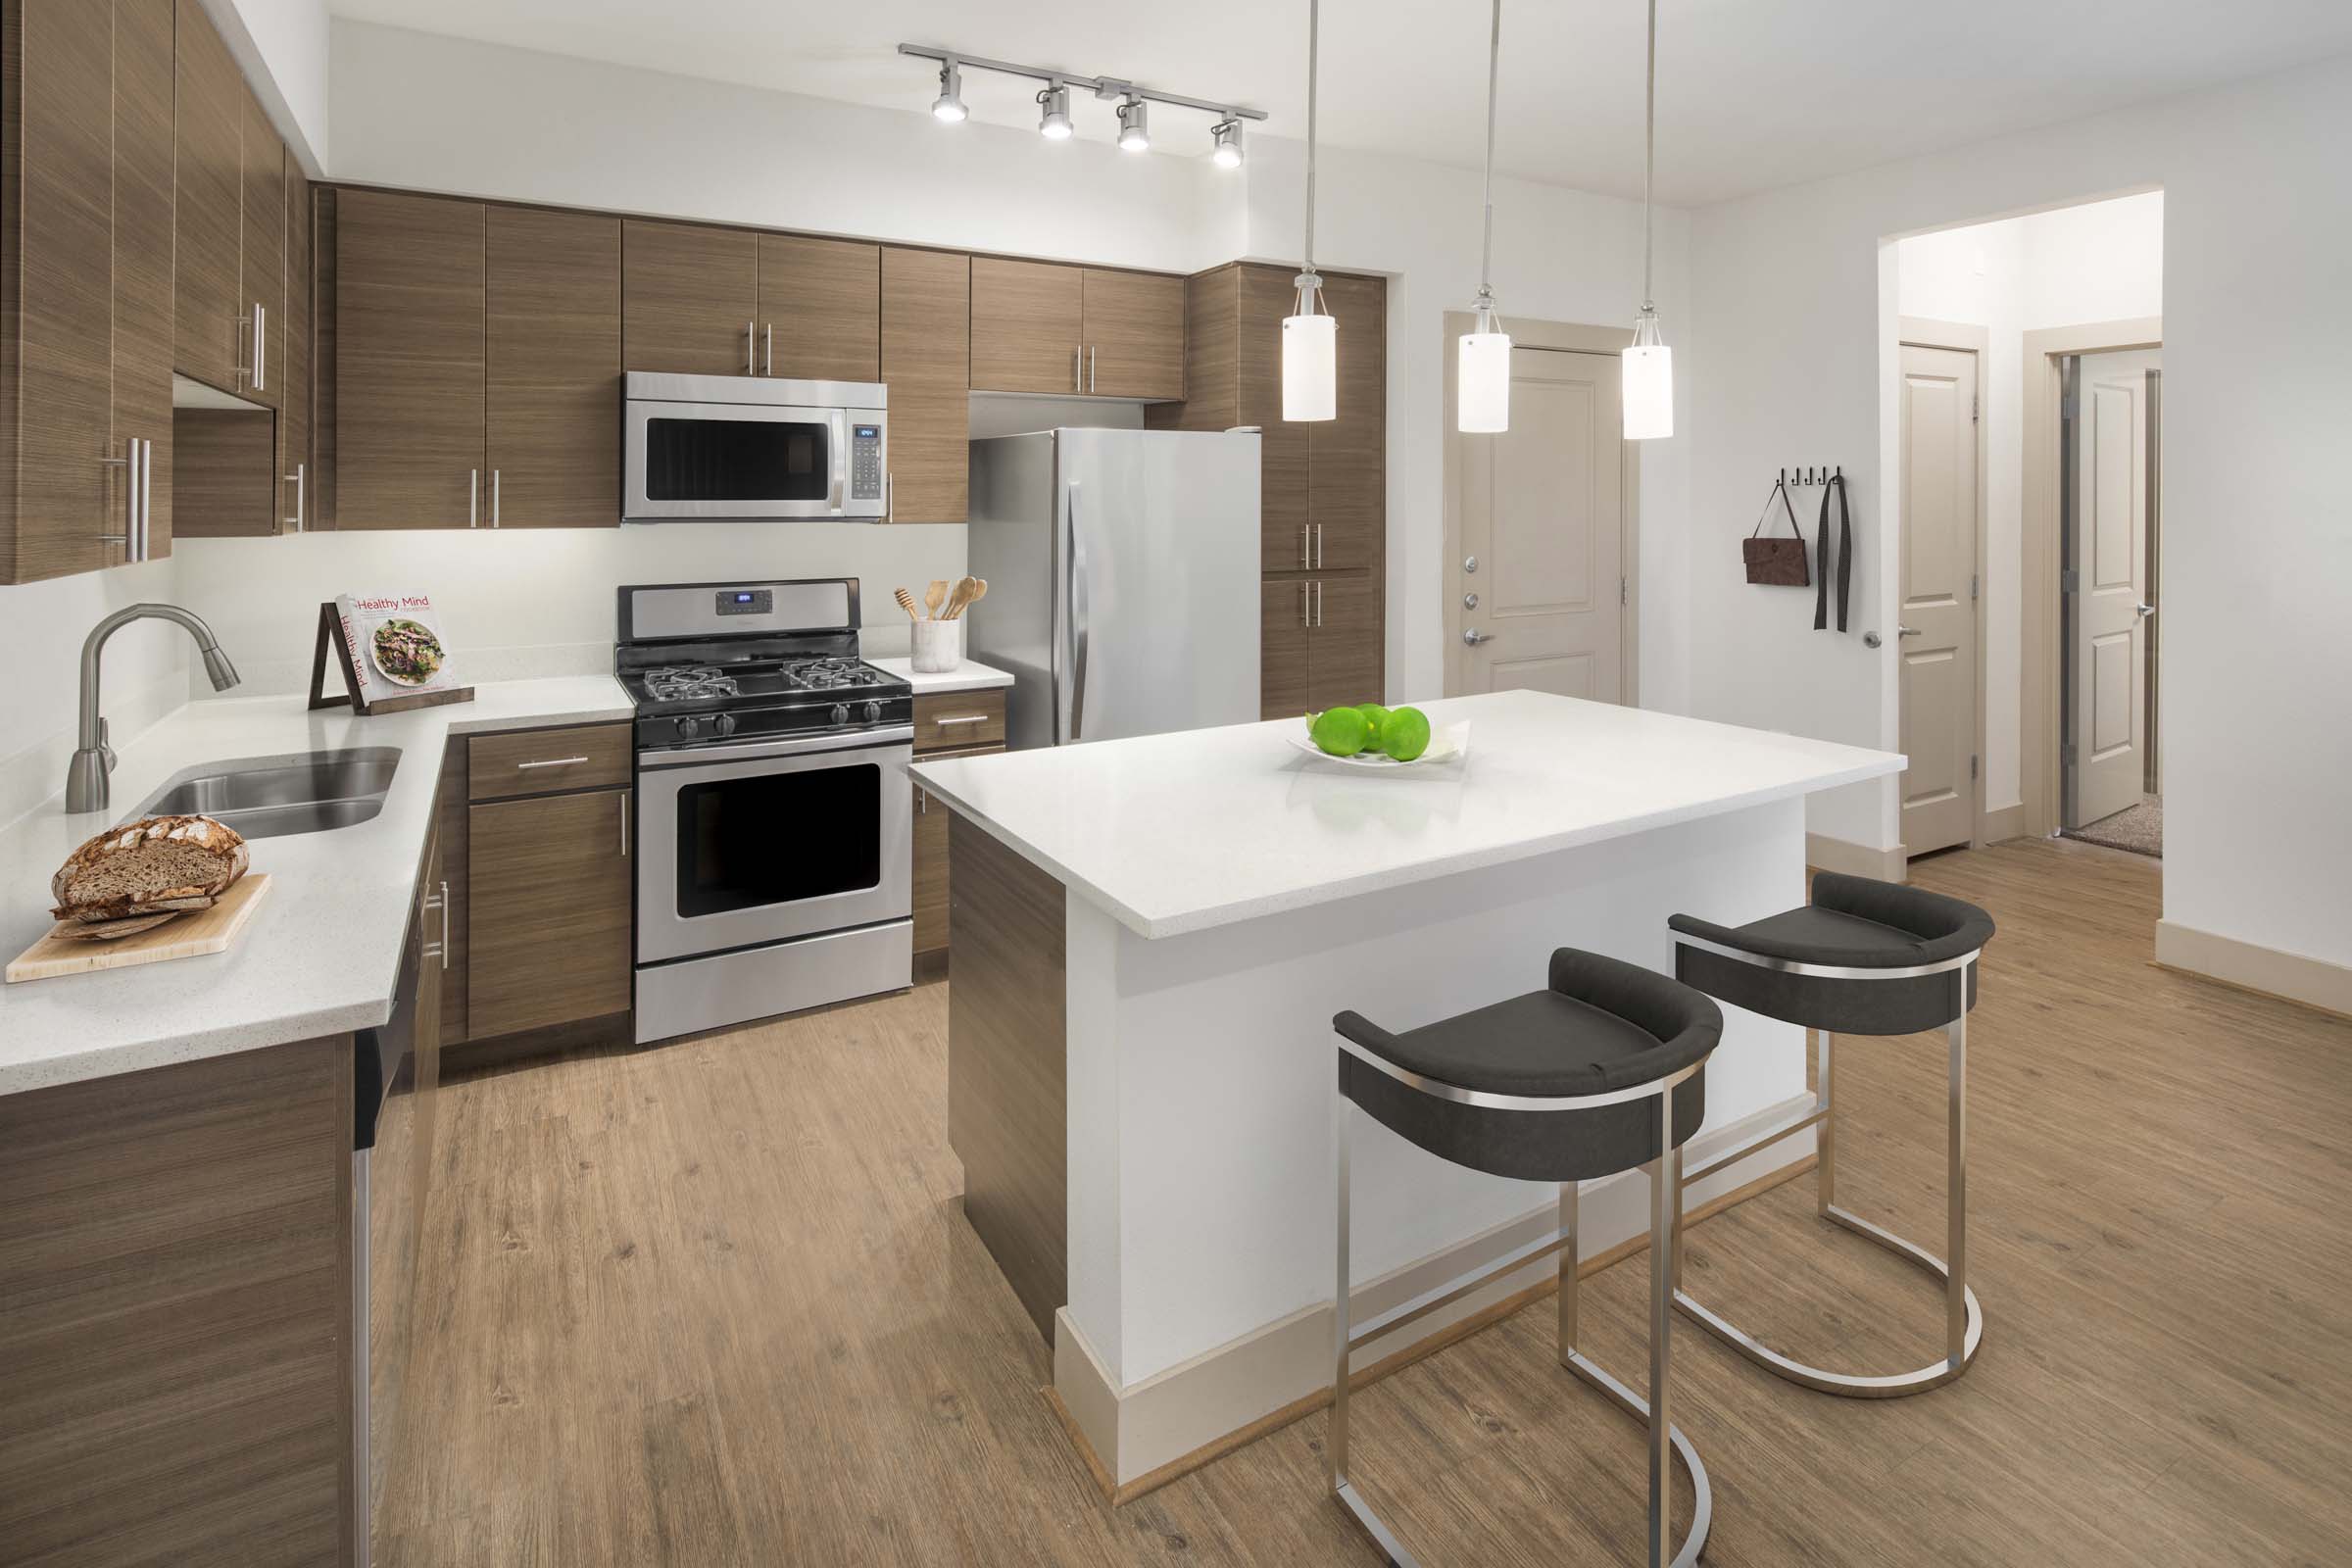 Camden Foothills Apartments Scottsdale AZ open concept kitchen with stainless steel appliances and island